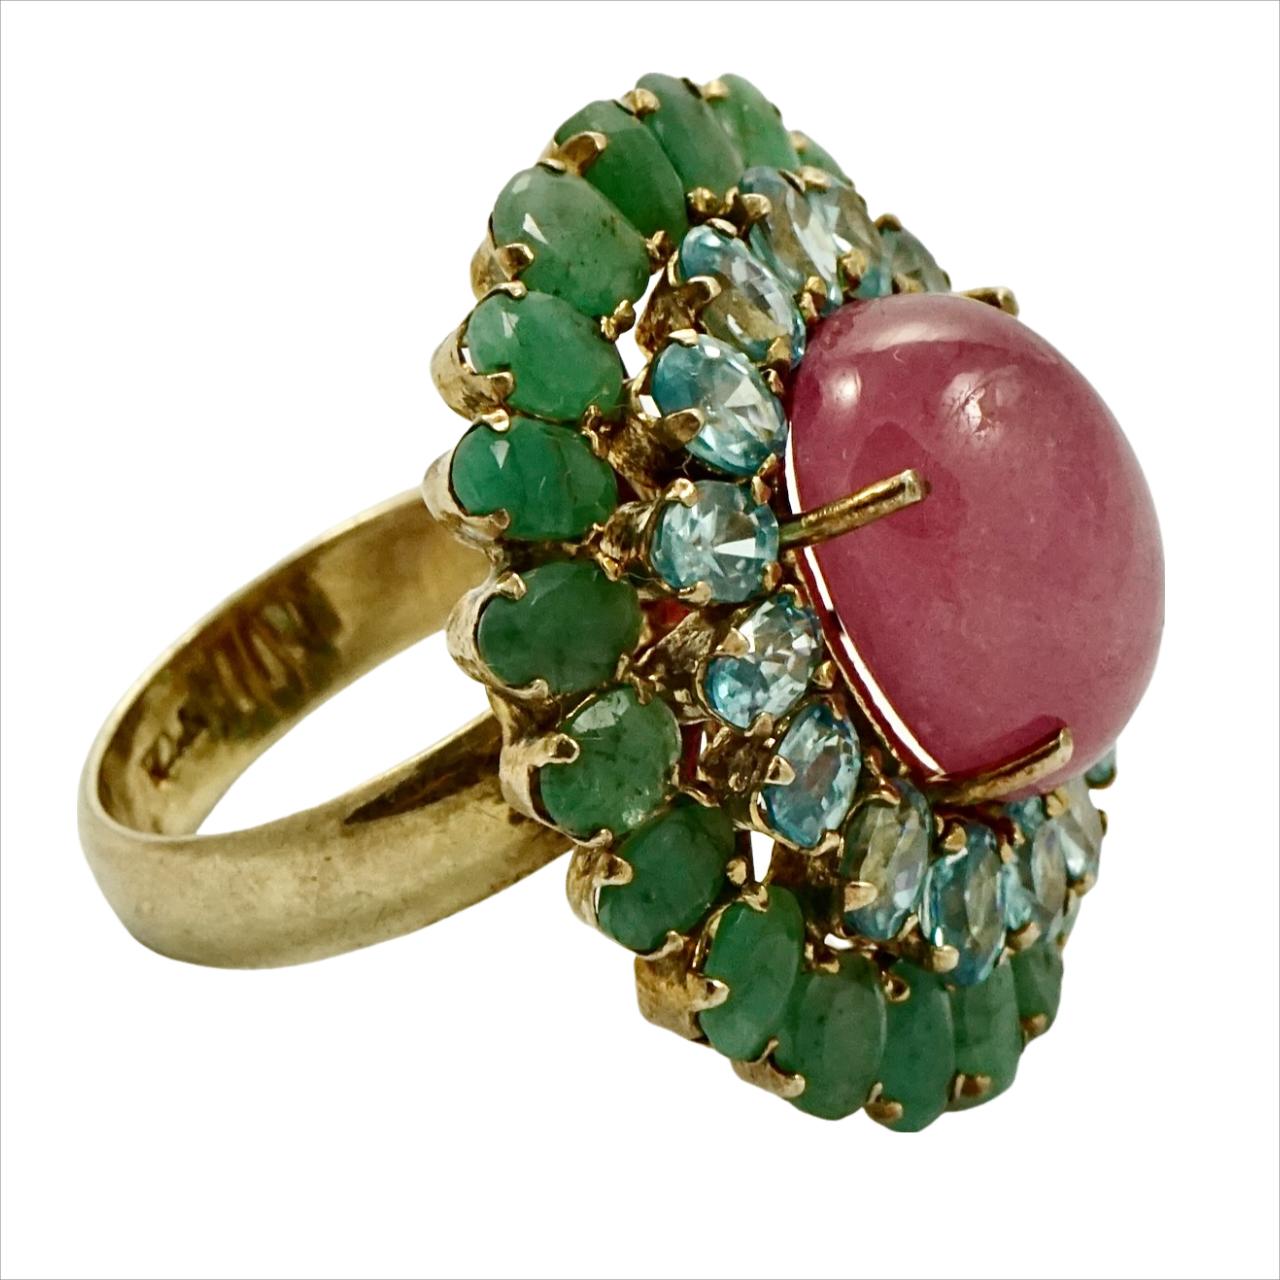 Oval Cut Gold Vermeil on Sterling Silver Cocktail Ring with Blue Topaz, Emerald and Ruby